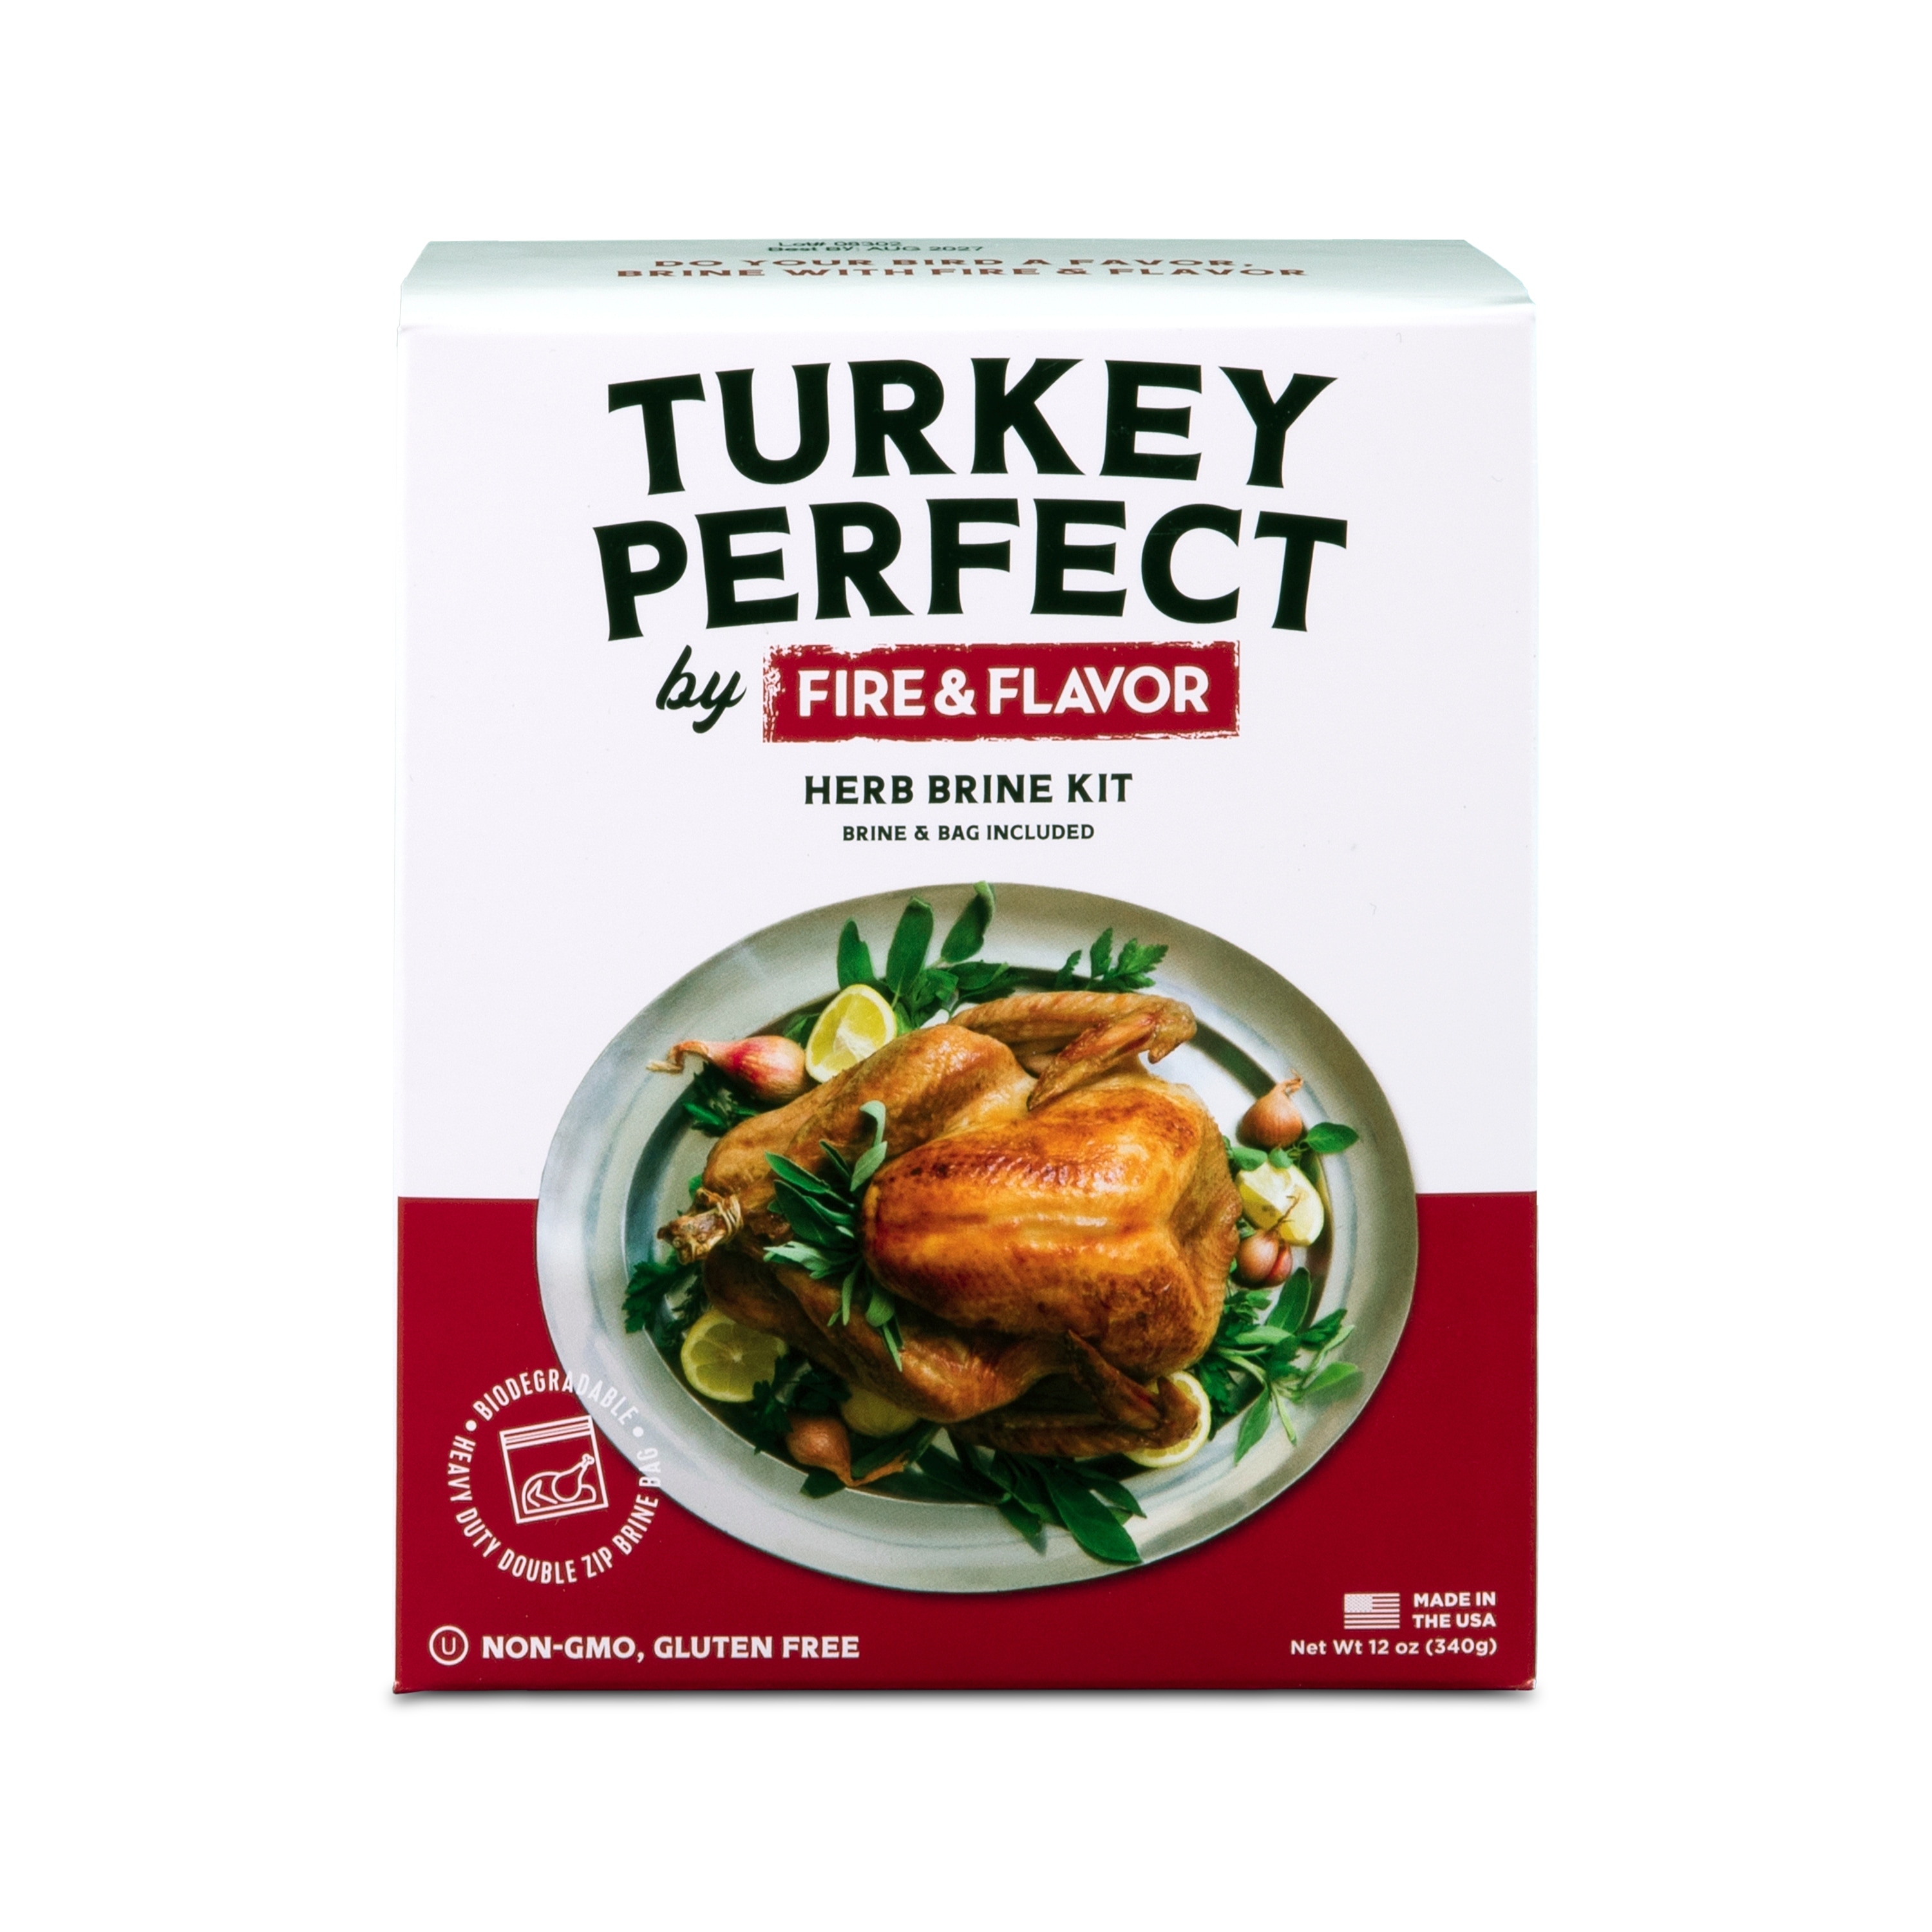 https://ak1.ostkcdn.com/images/products/is/images/direct/7b546fadc57440e210186d02755b684aa698e4bc/Turkey-Perfect-by-Fire-%26-Flavor-All-Natural-Herb-Brine-Kit%2C-Brine-%26-Bag-Included%2C-12oz.jpg